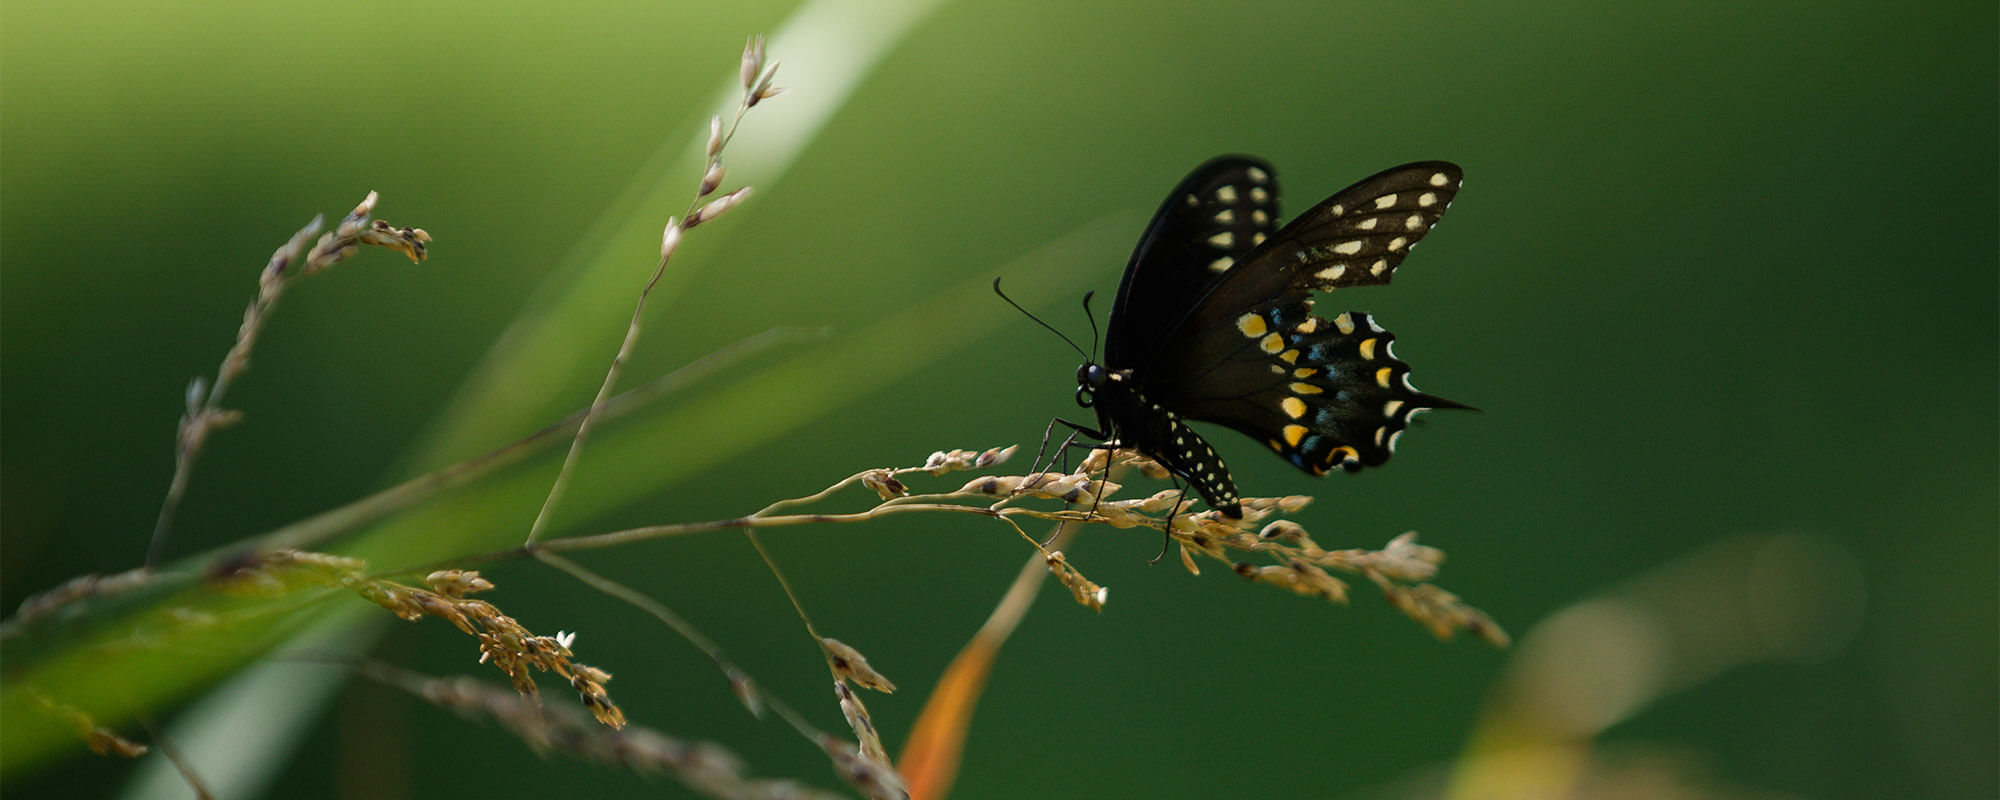 Butterfly resting on forage